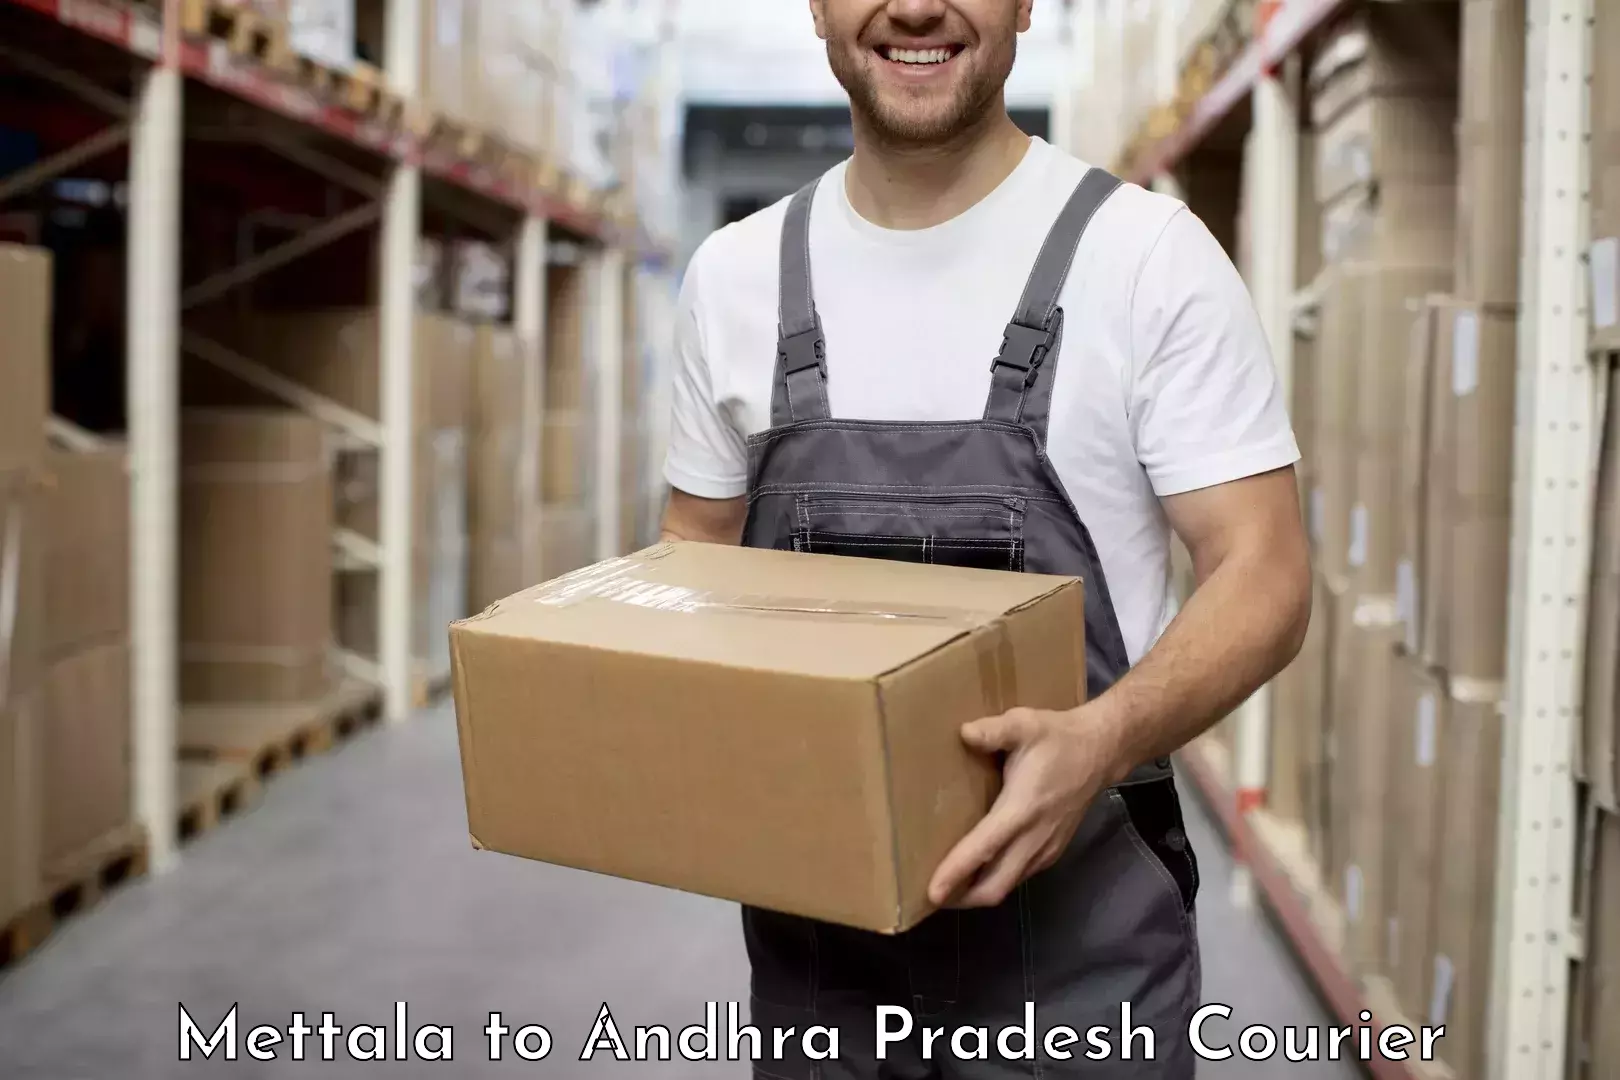 Professional courier handling Mettala to Tenali